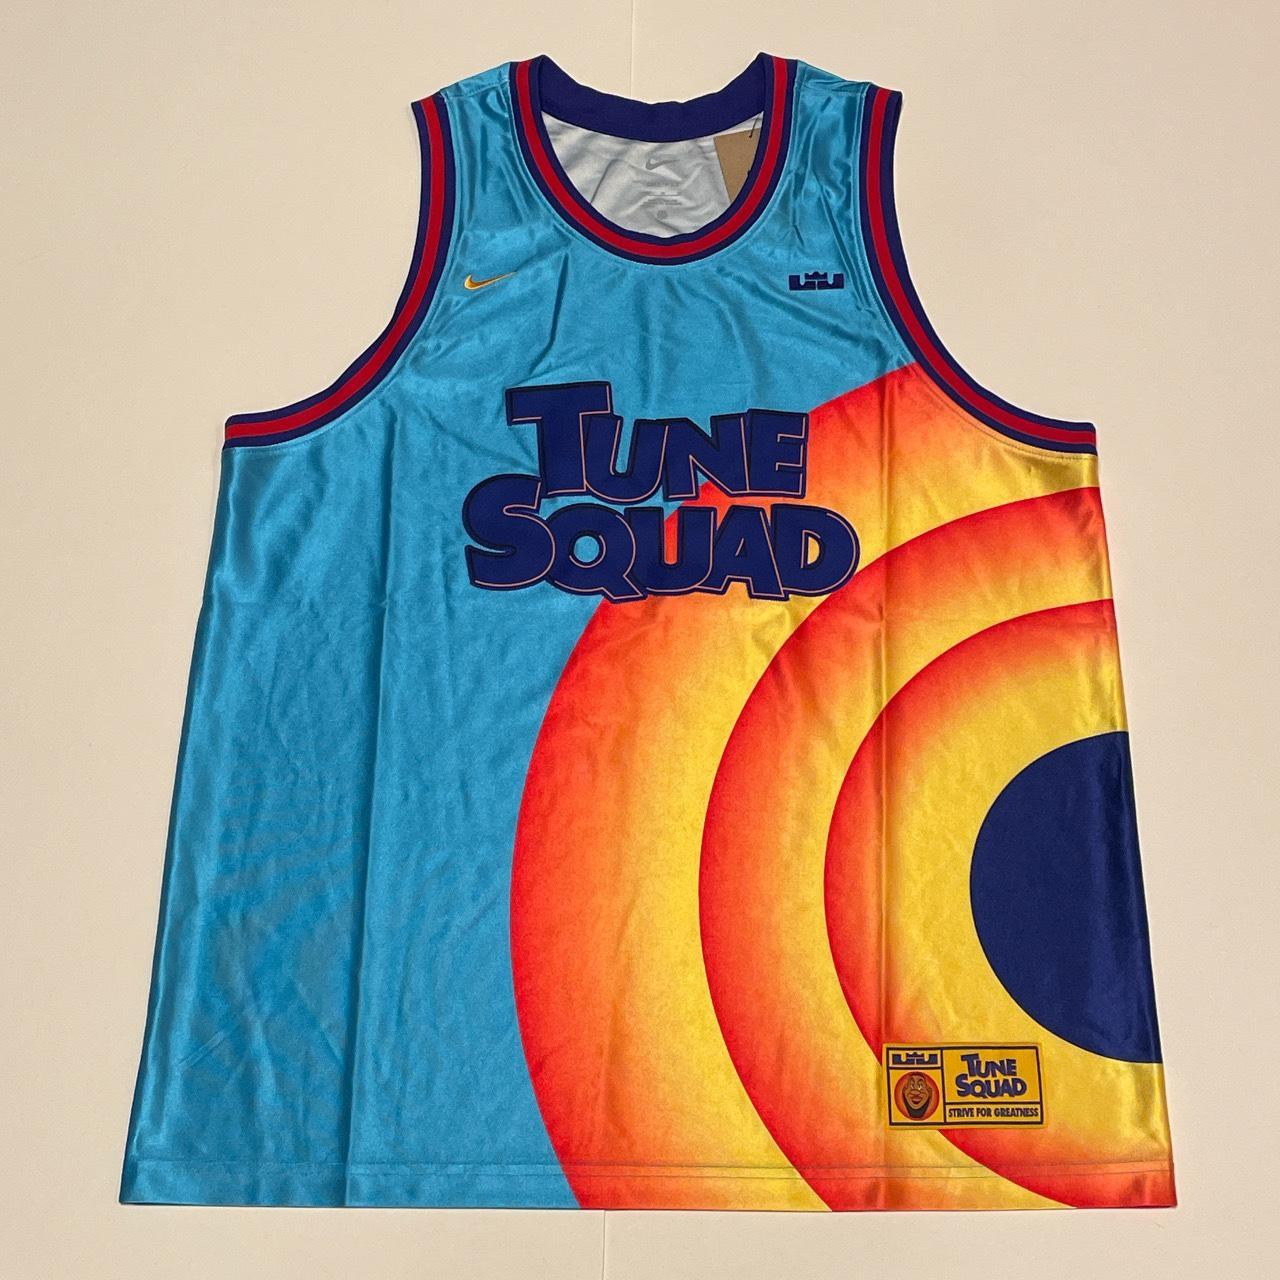 NEW XL Nike TUNE SQUAD Lebron James Space Jam Jersey